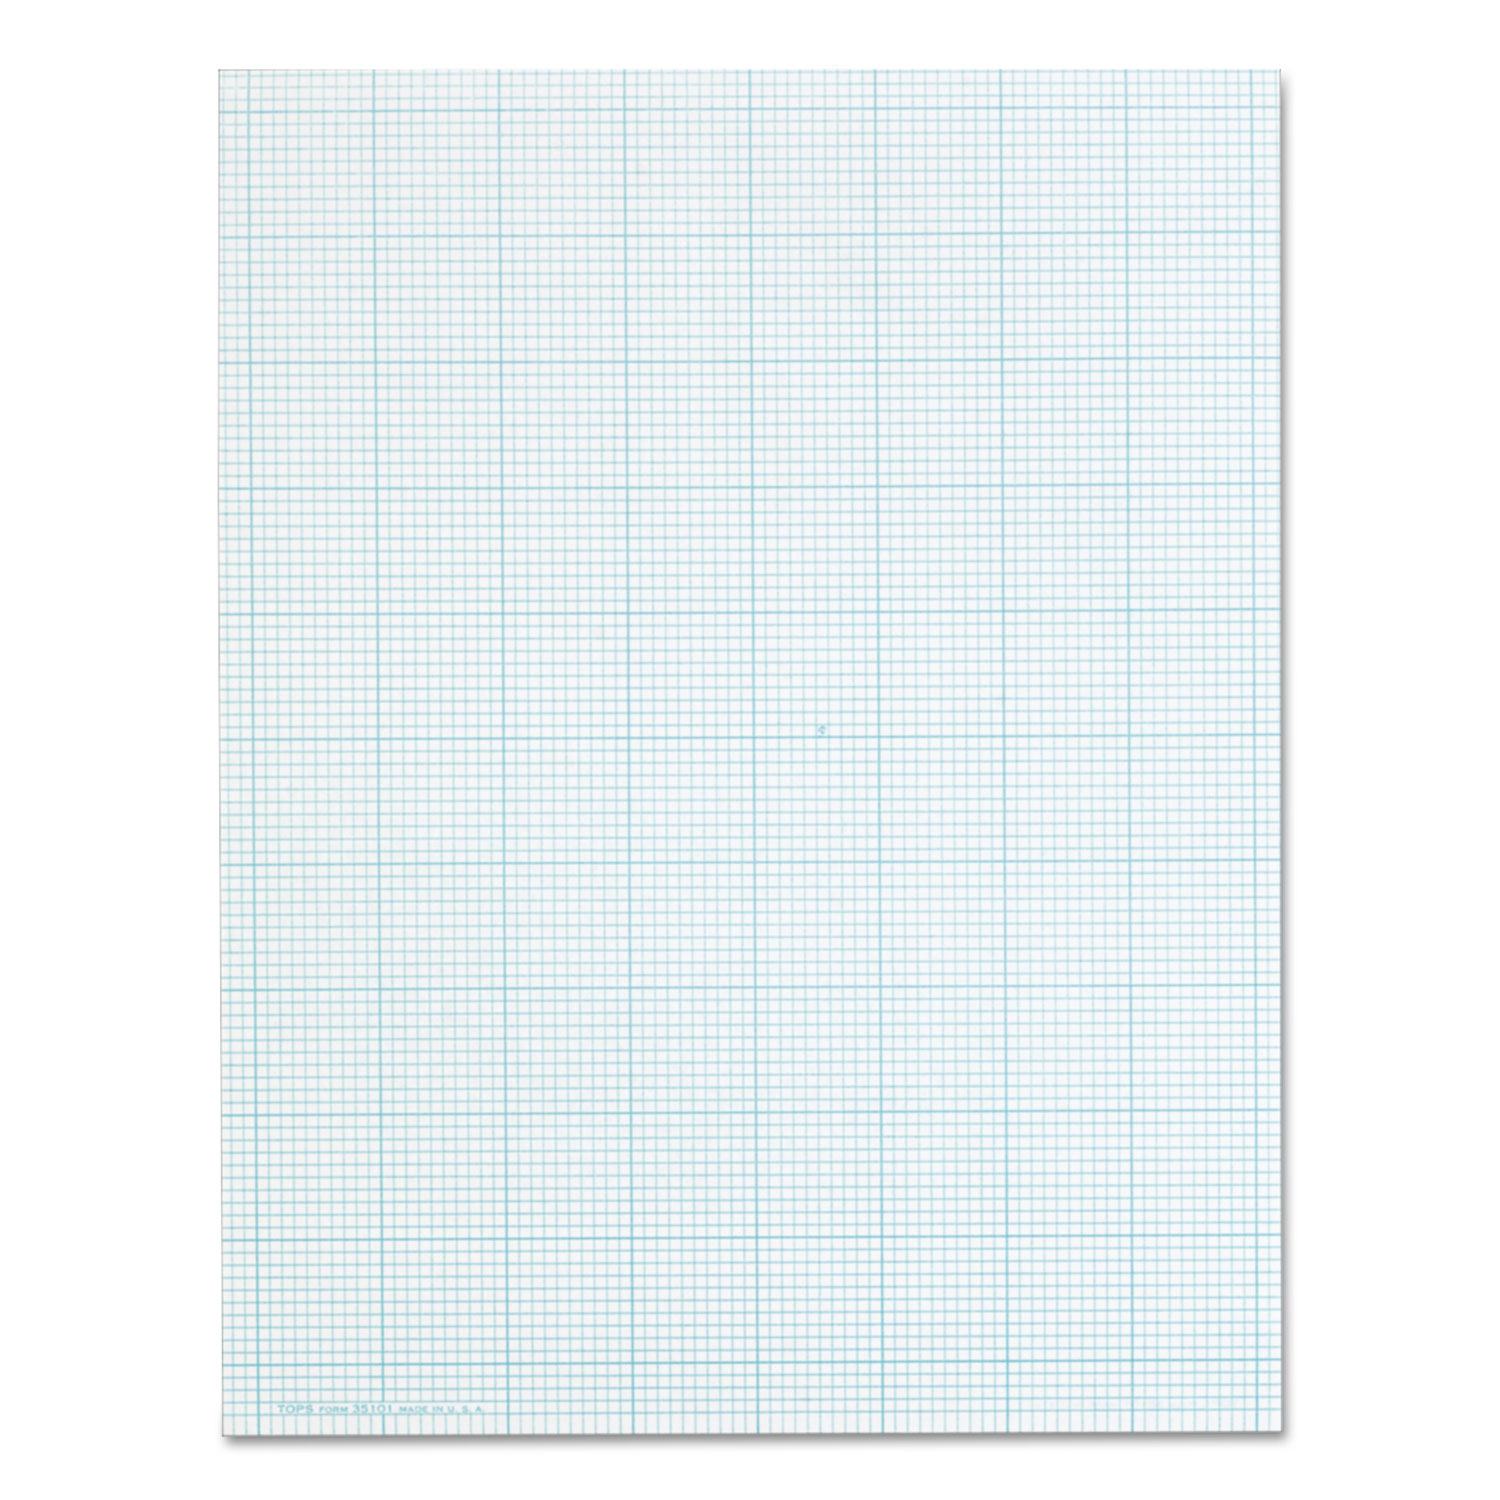  TOPS 35101 Cross Section Pads, 10 sq/in Quadrille Rule, 8.5 x 11, White, 50 Sheets (TOP35101) 